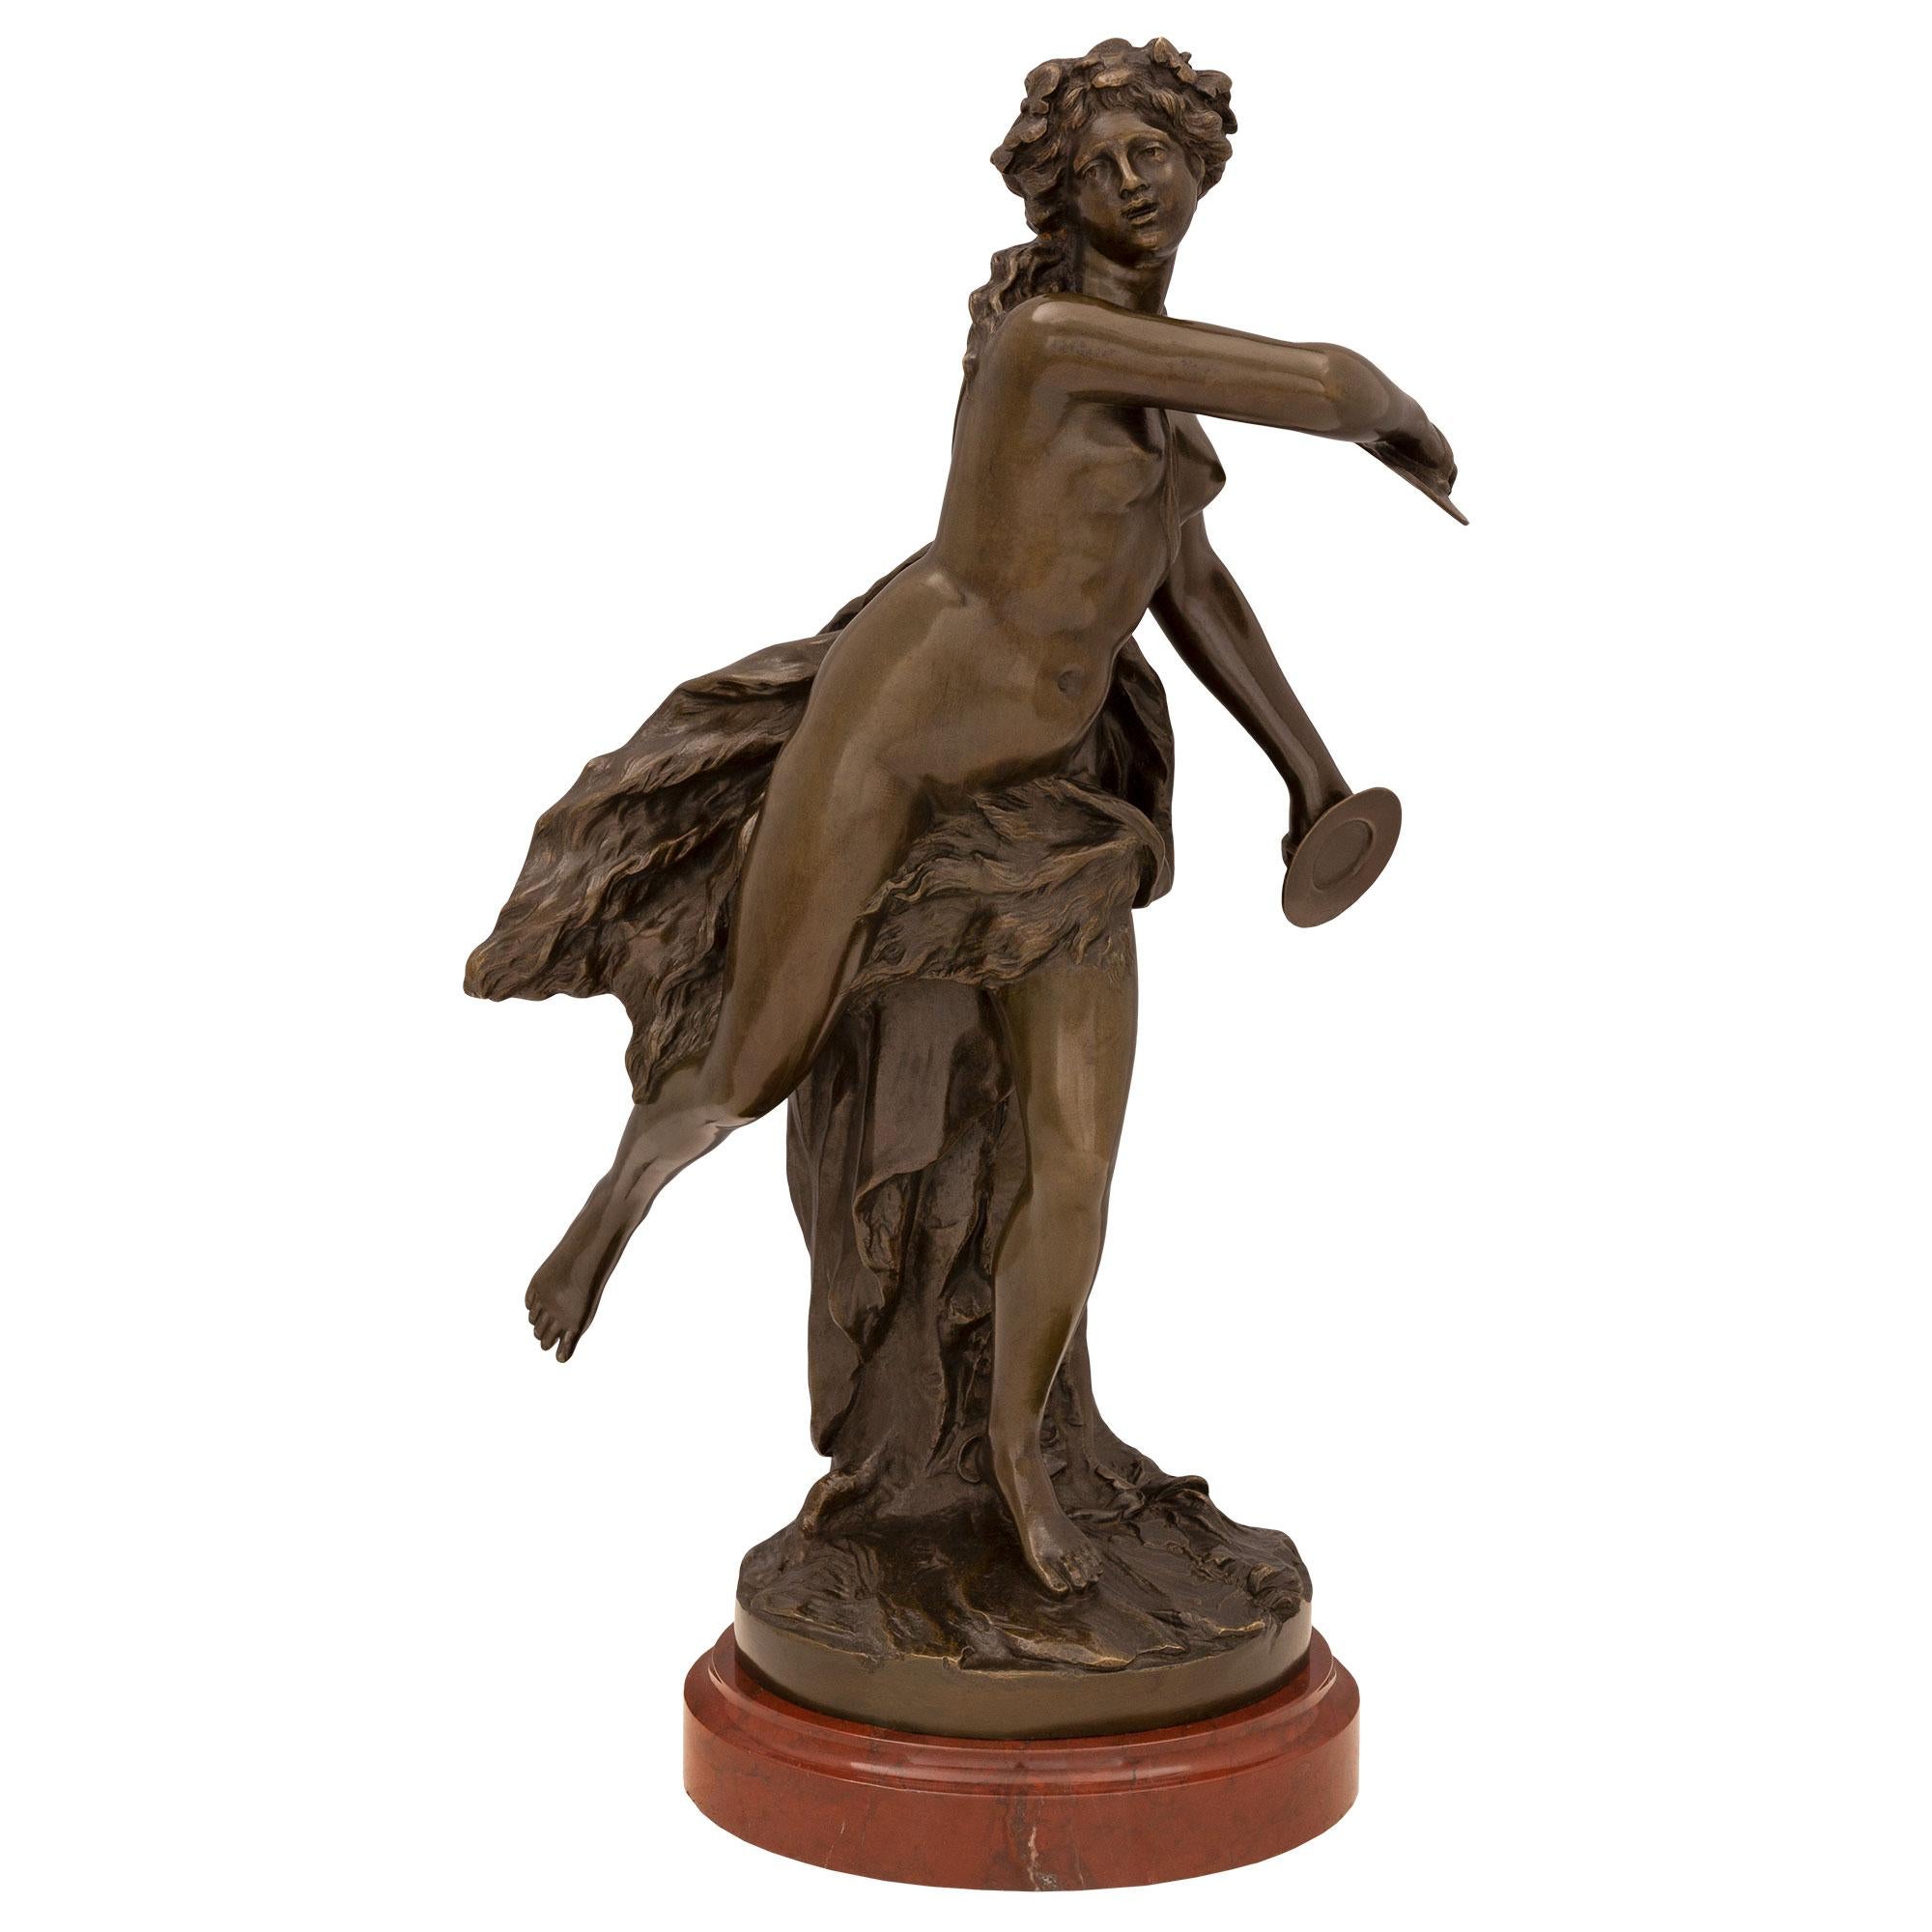 French 19th Century Louis XVI Style Statue of a Maiden Dancing with Cymbals